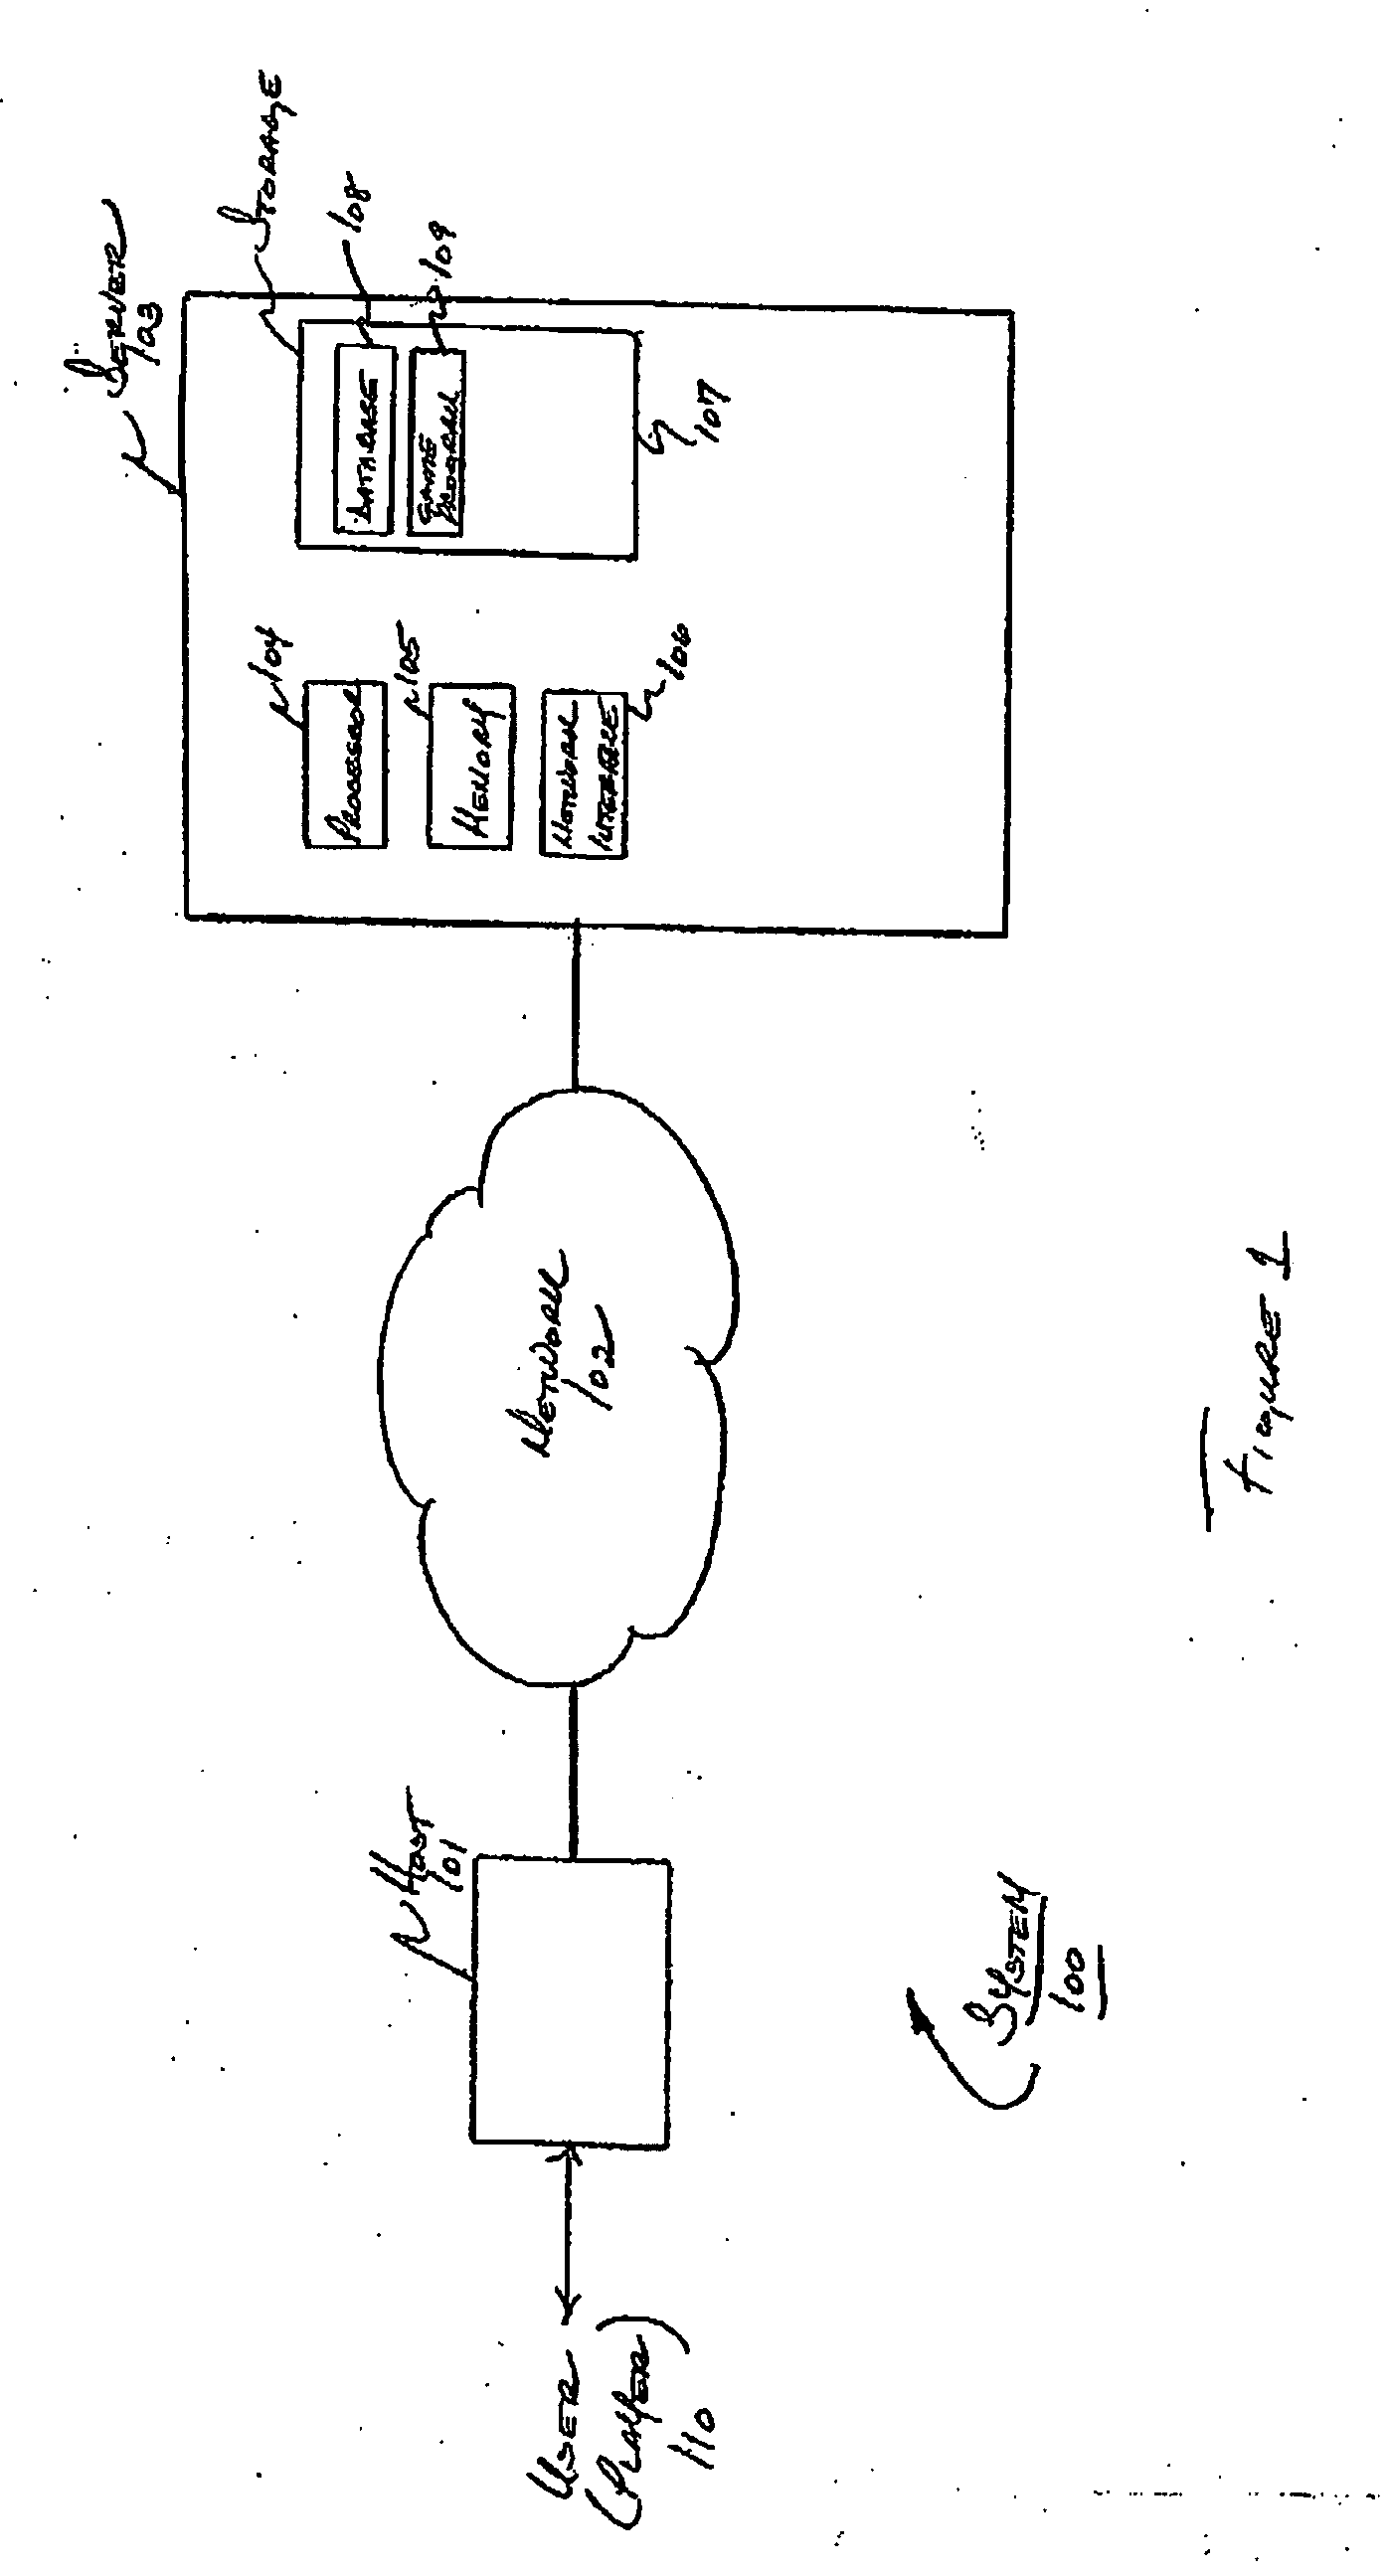 Method and apparatus for conducting a game tournament